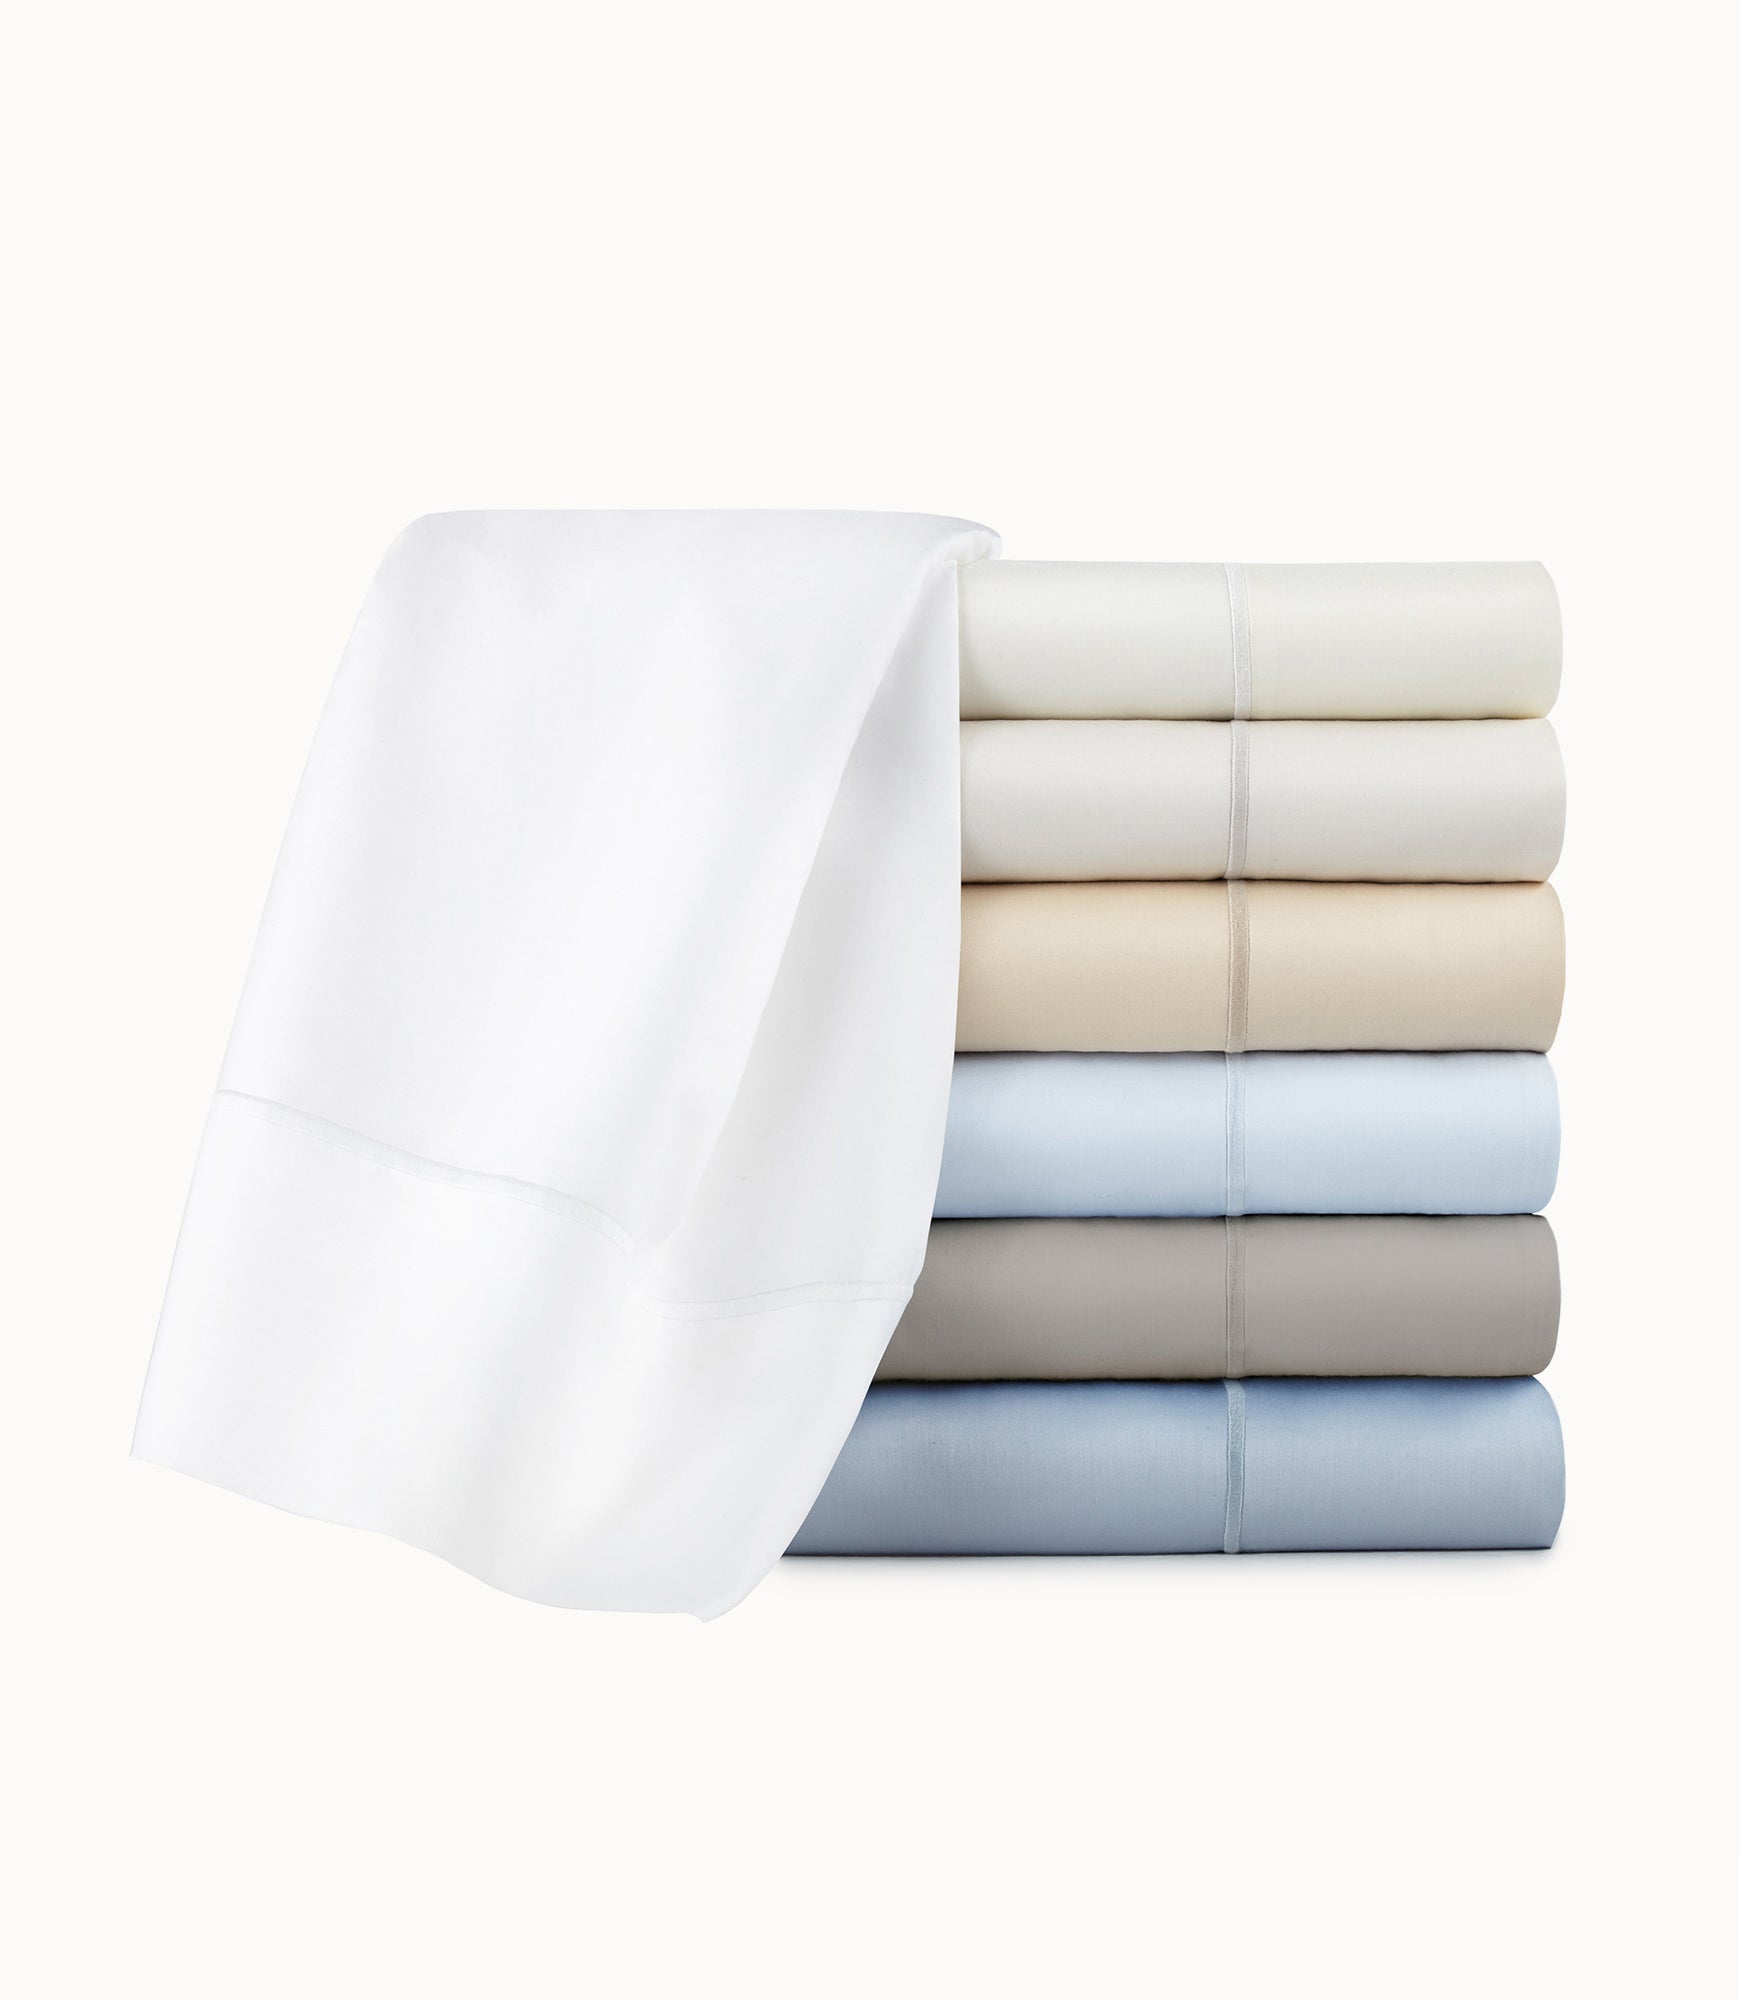 Soprano Sheets Multiple Colors White Ivory Linen Platinum Barely Blue Pewter Blue